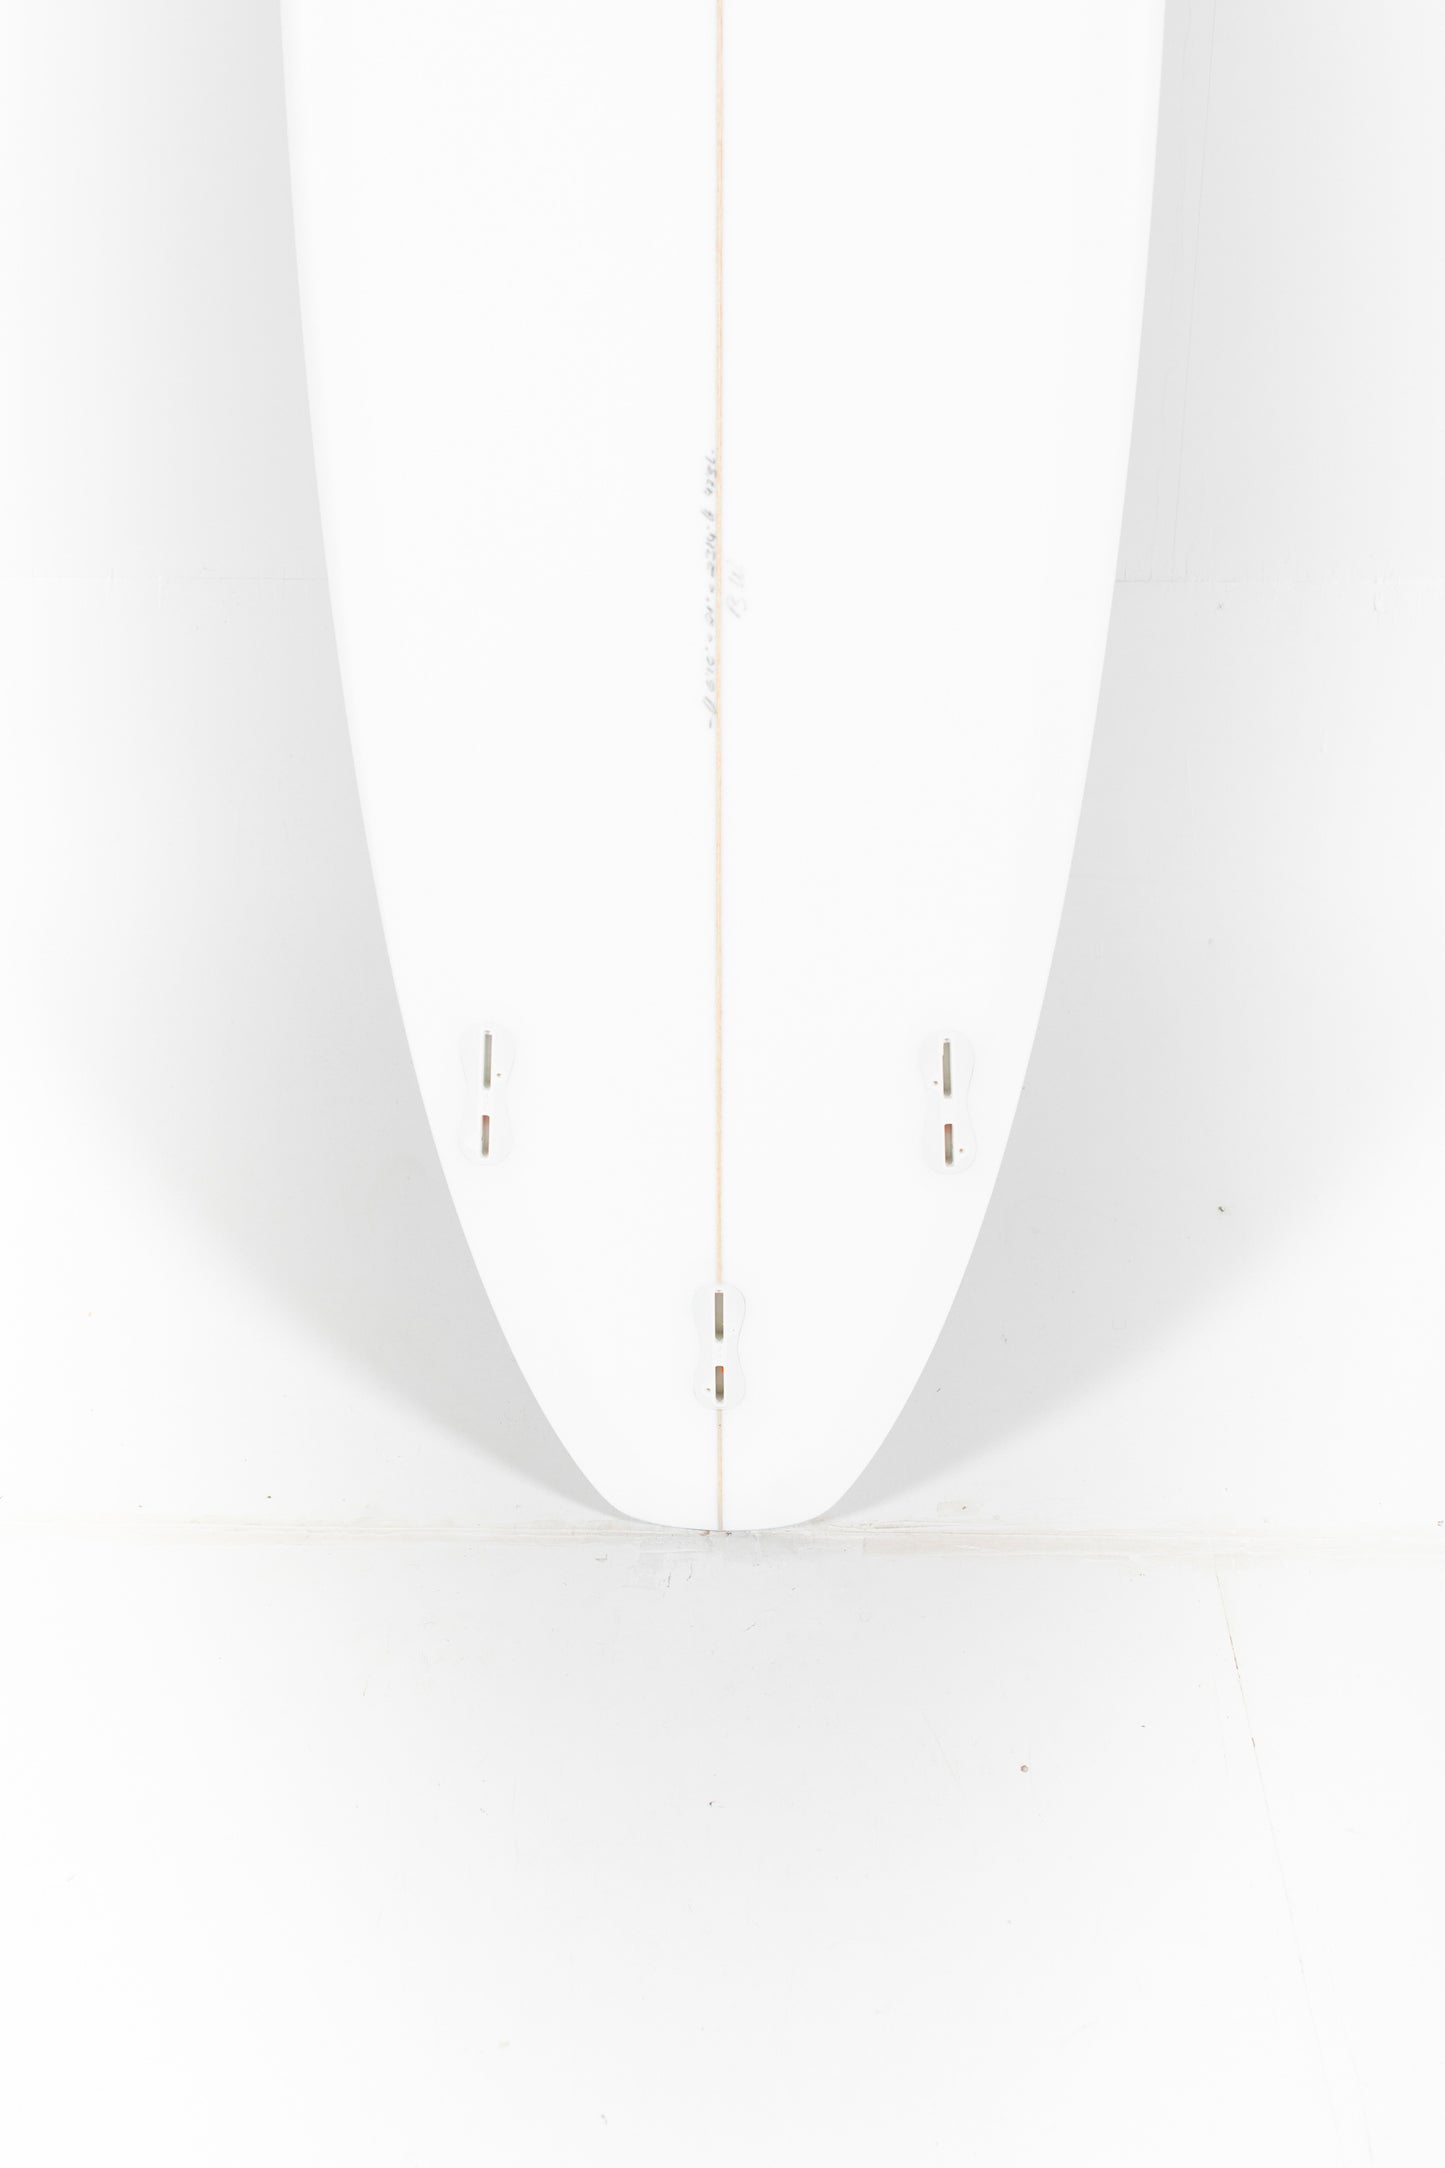 
                  
                    BW SURFBOARDS - BW SURFBOARDS Evolutivo 6'10" x 21 x 2 3/4 x 47.3L. at PUKAS SURF SHOP
                  
                